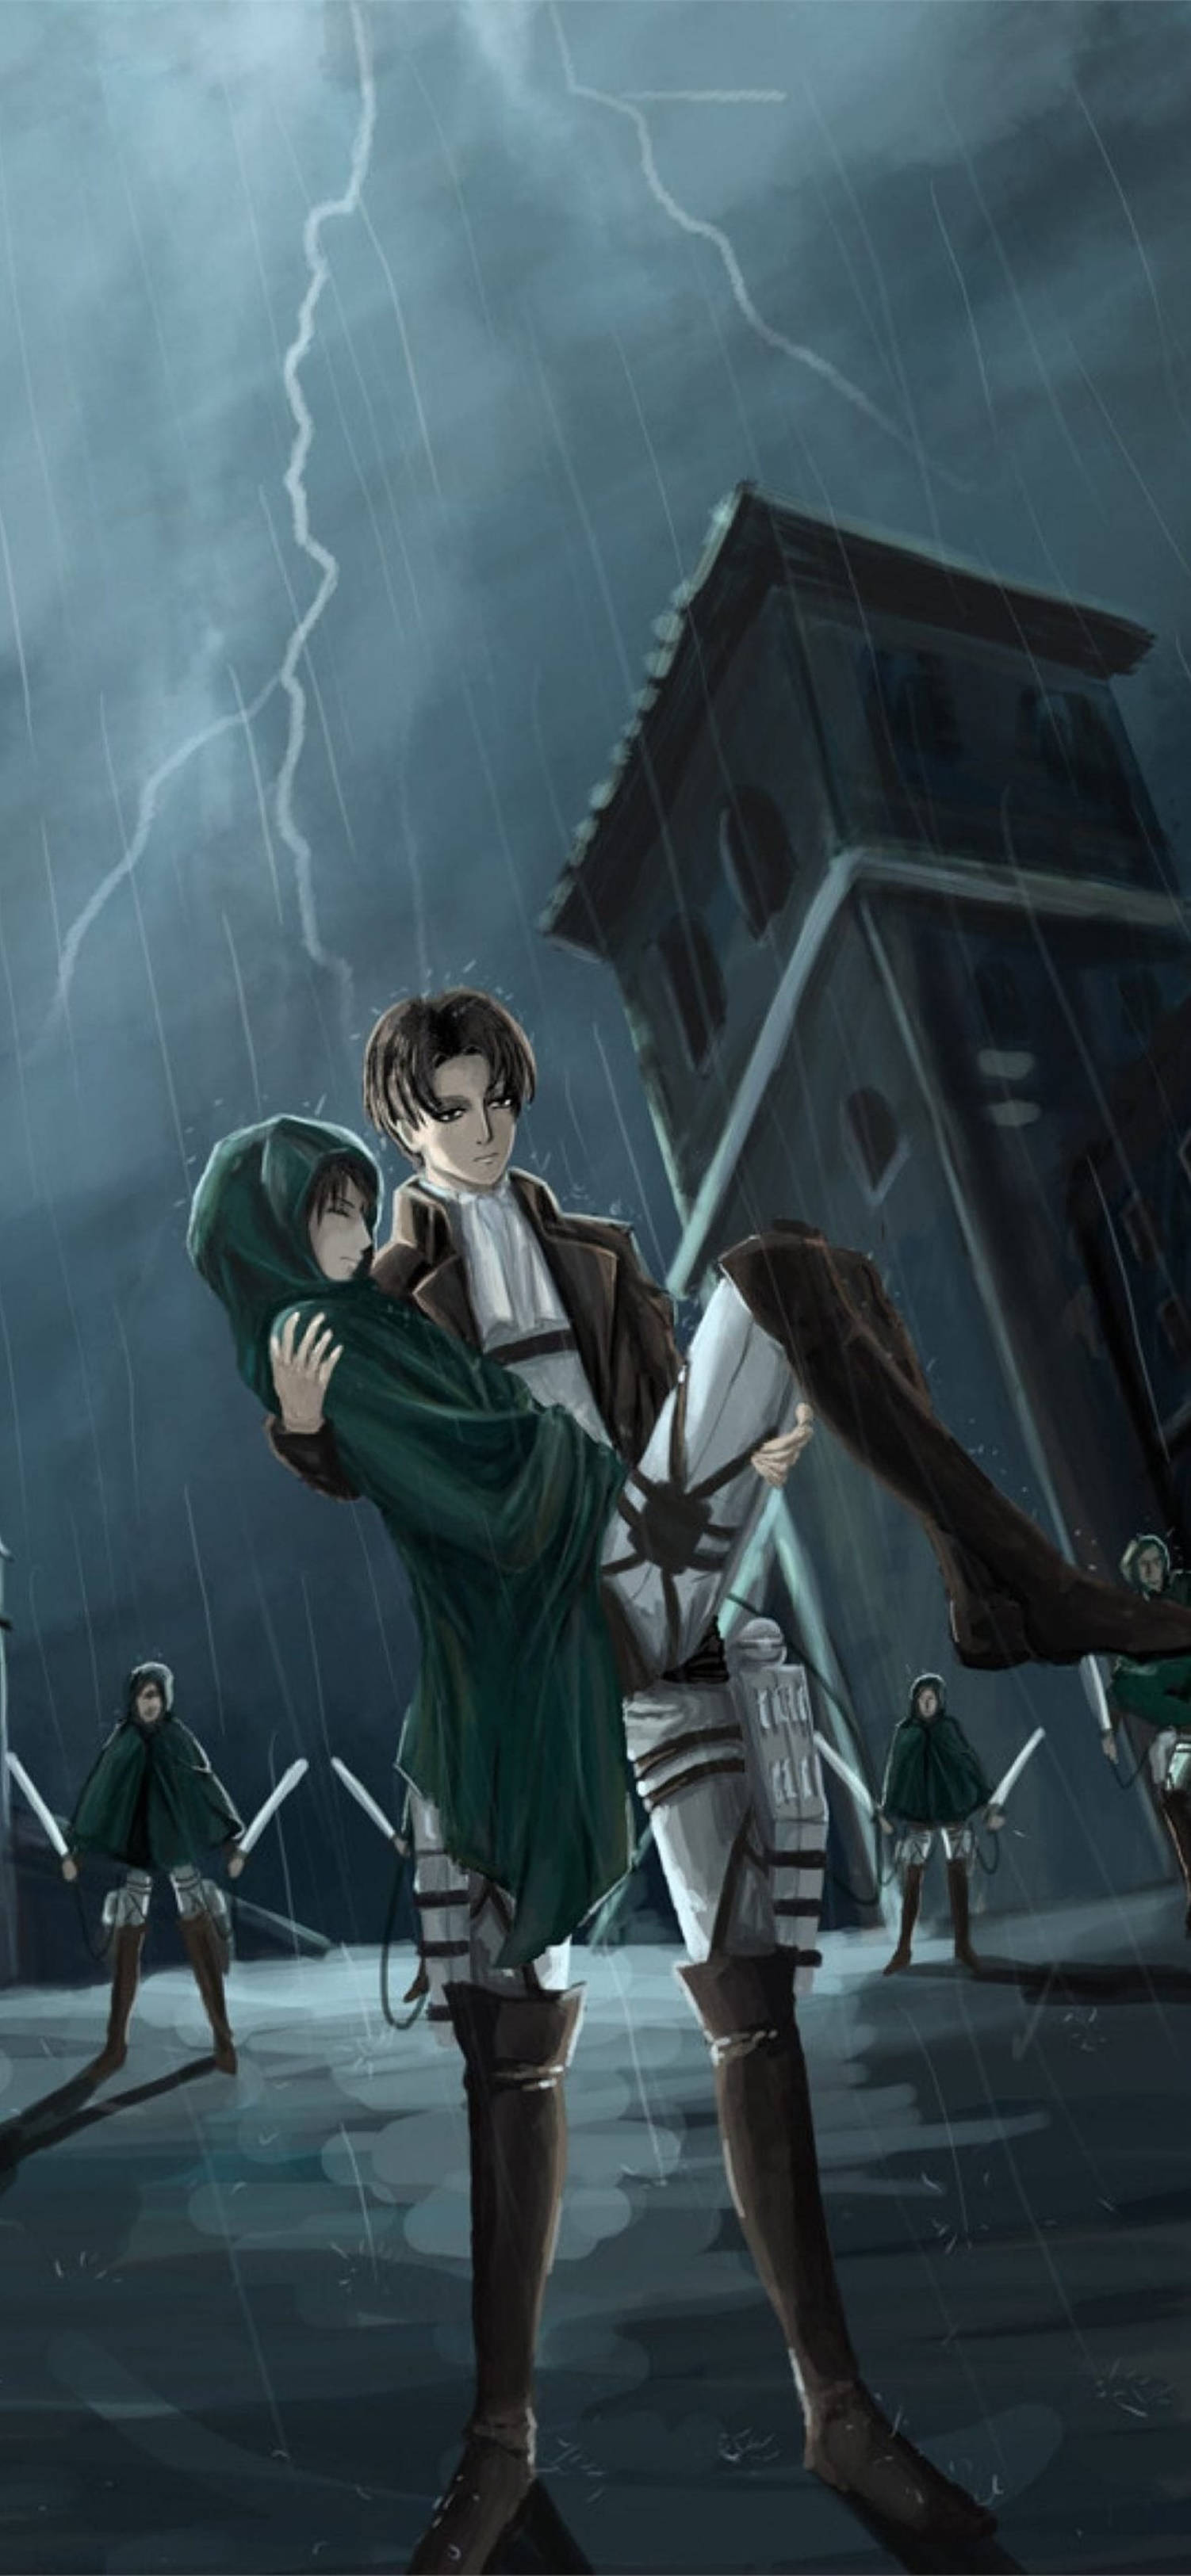 Titan Battles In High Definition: Levi And Mikasa Ackerman In Action In Aot 4k Background